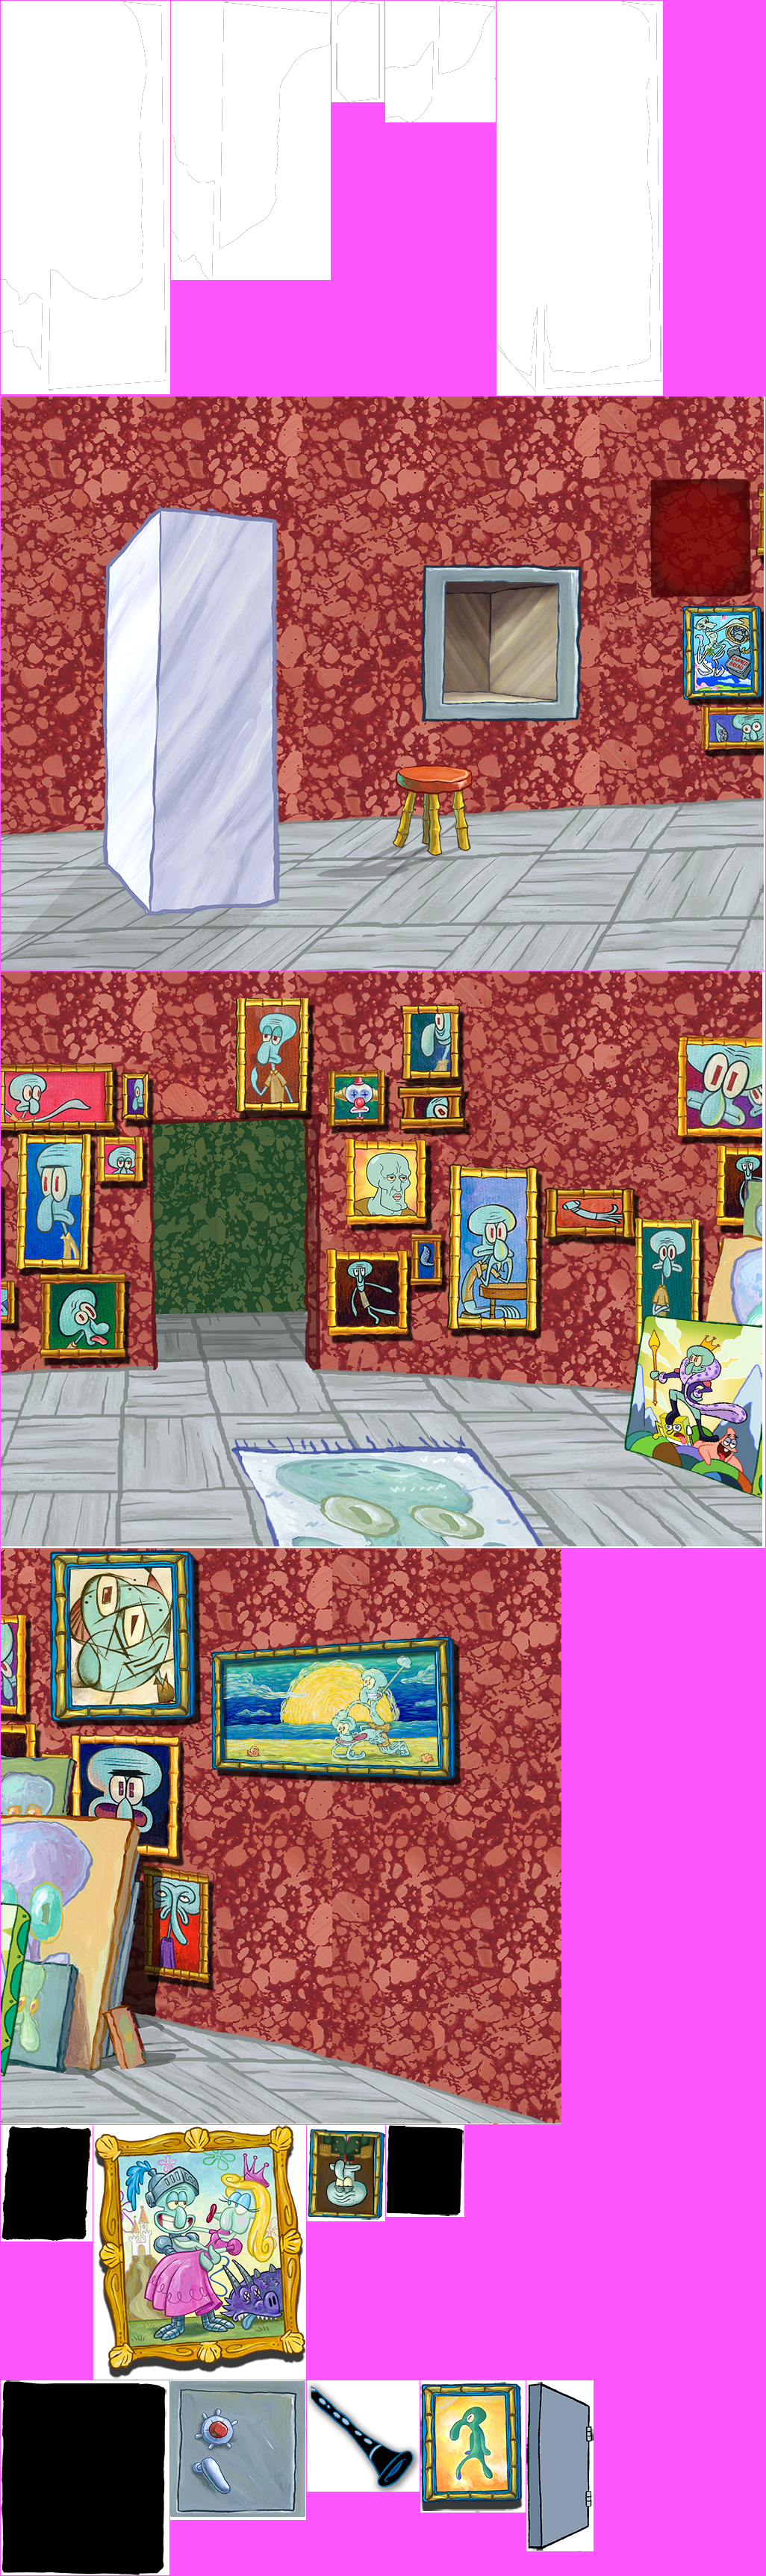 Squidward's Painting Room